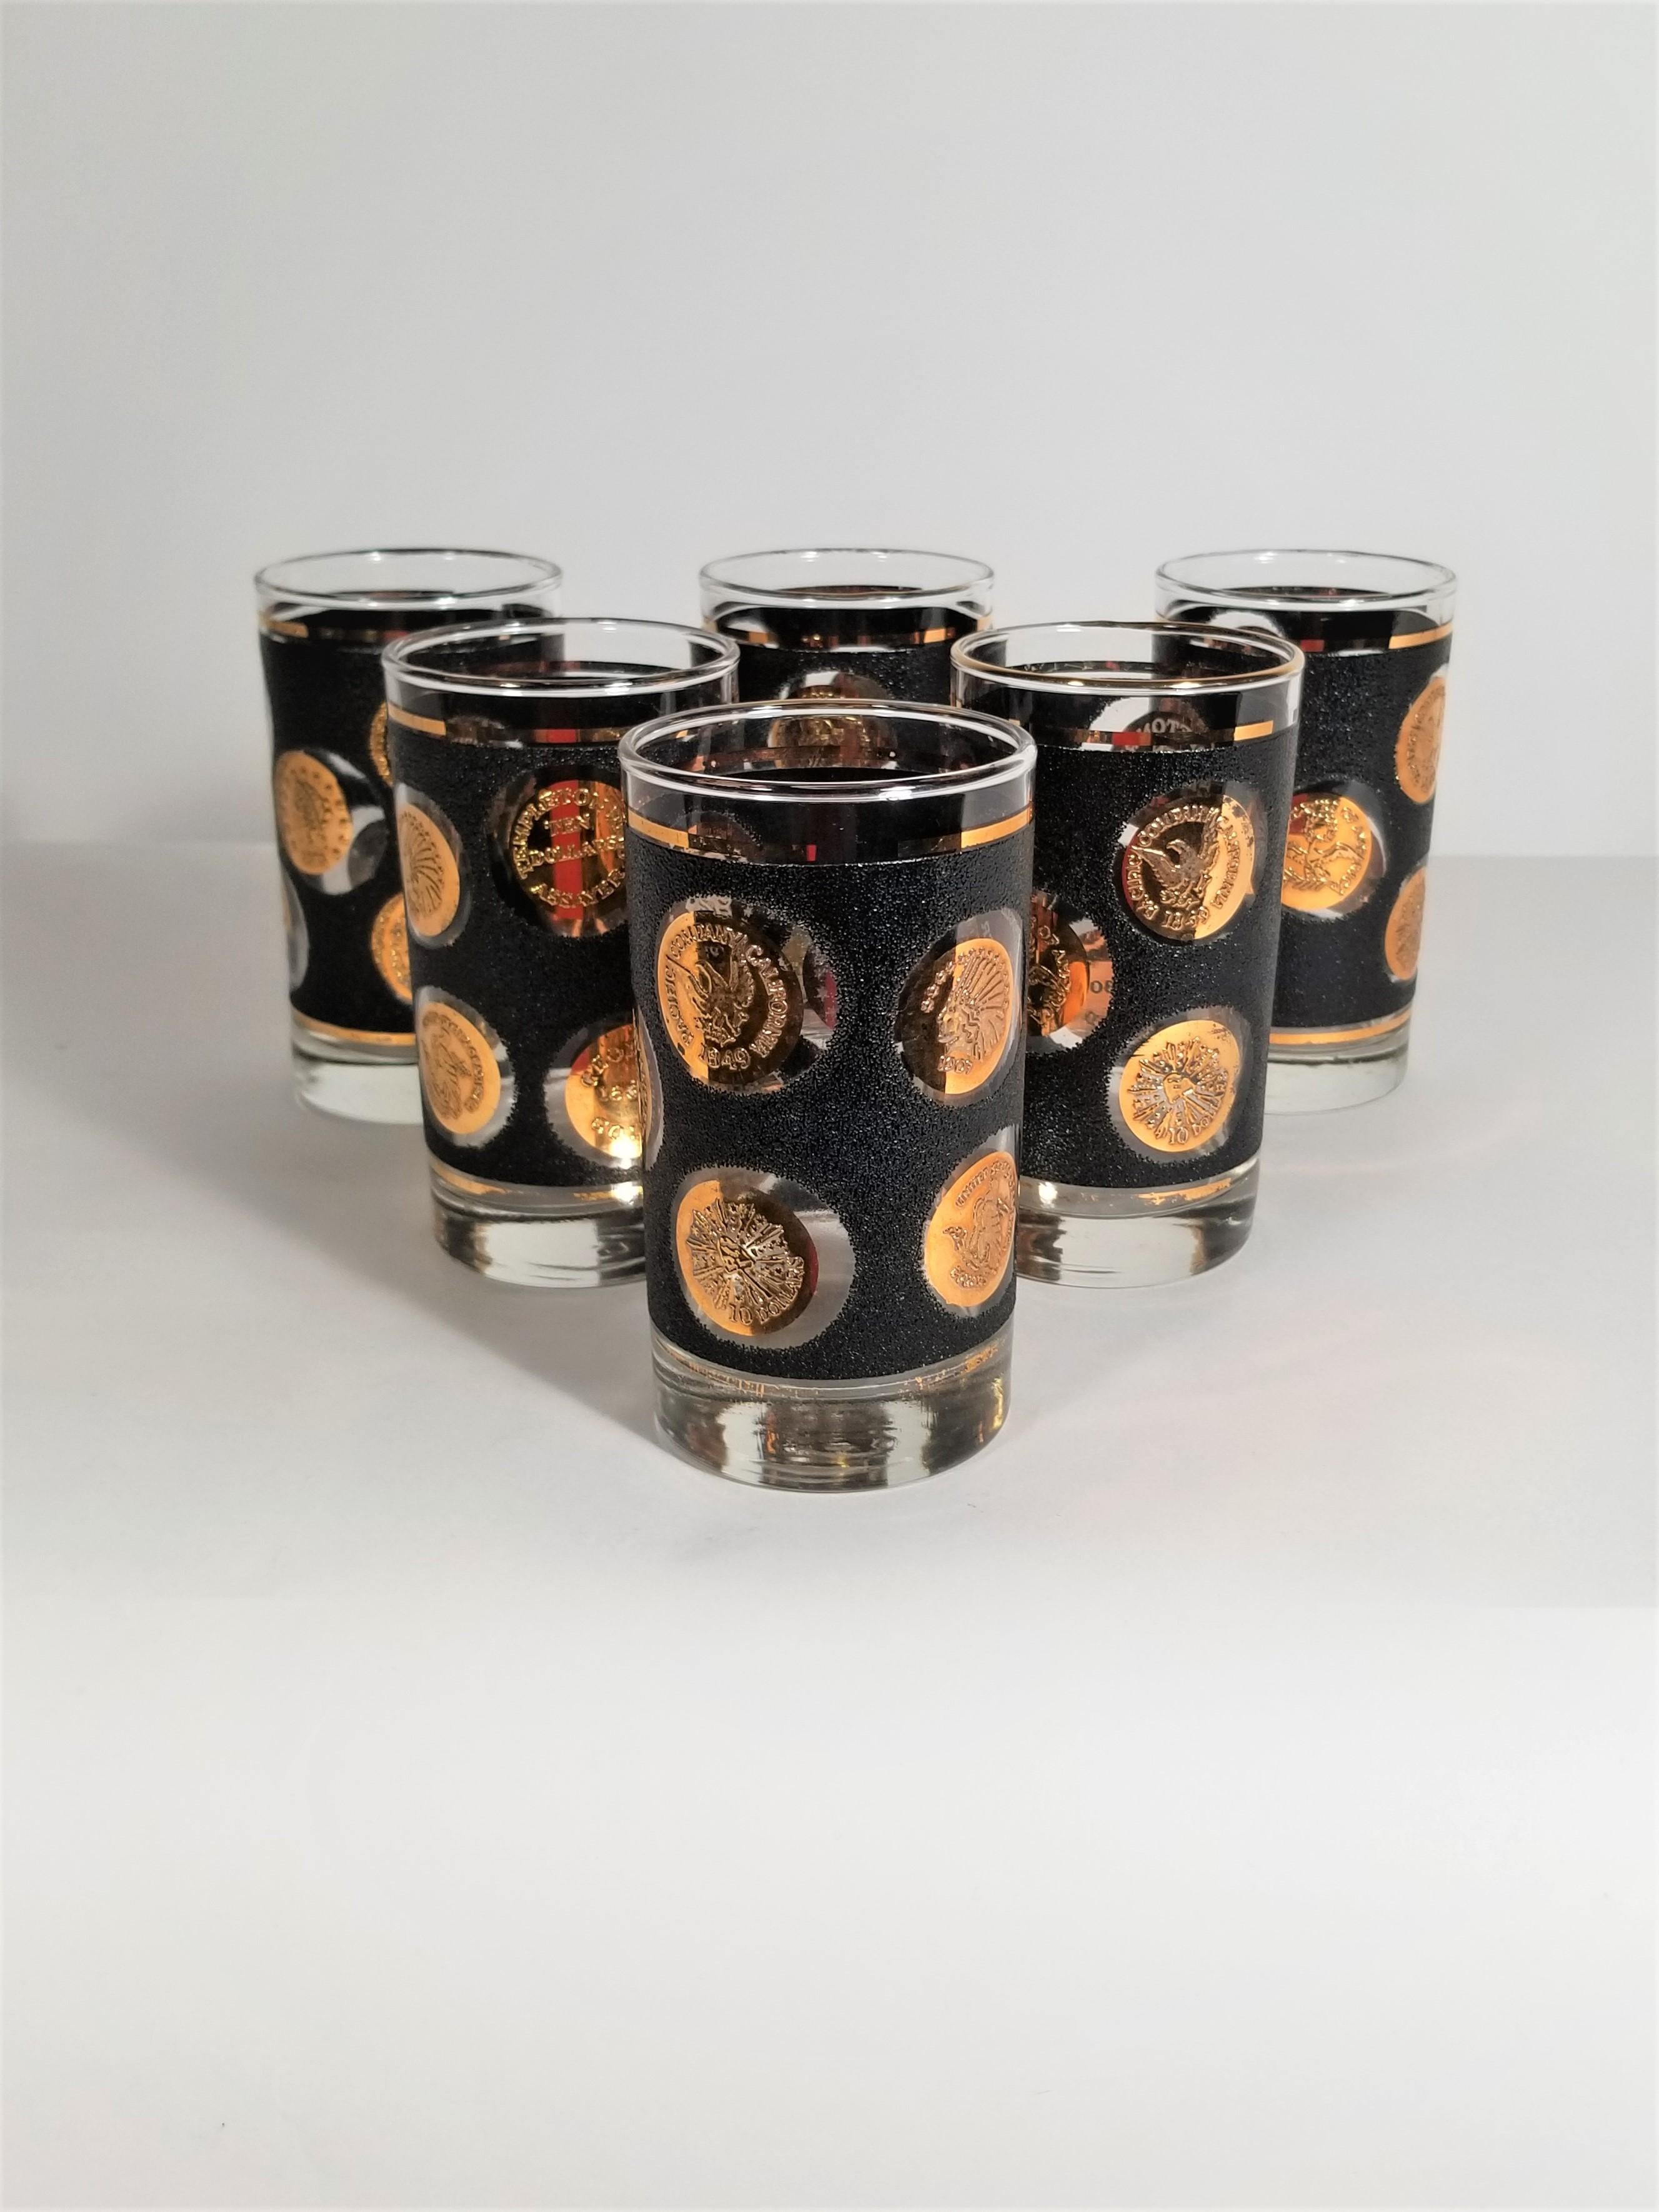 Mid-Century Modern Libbey Midcentury 1960s Black and Gold Glassware Set of 6